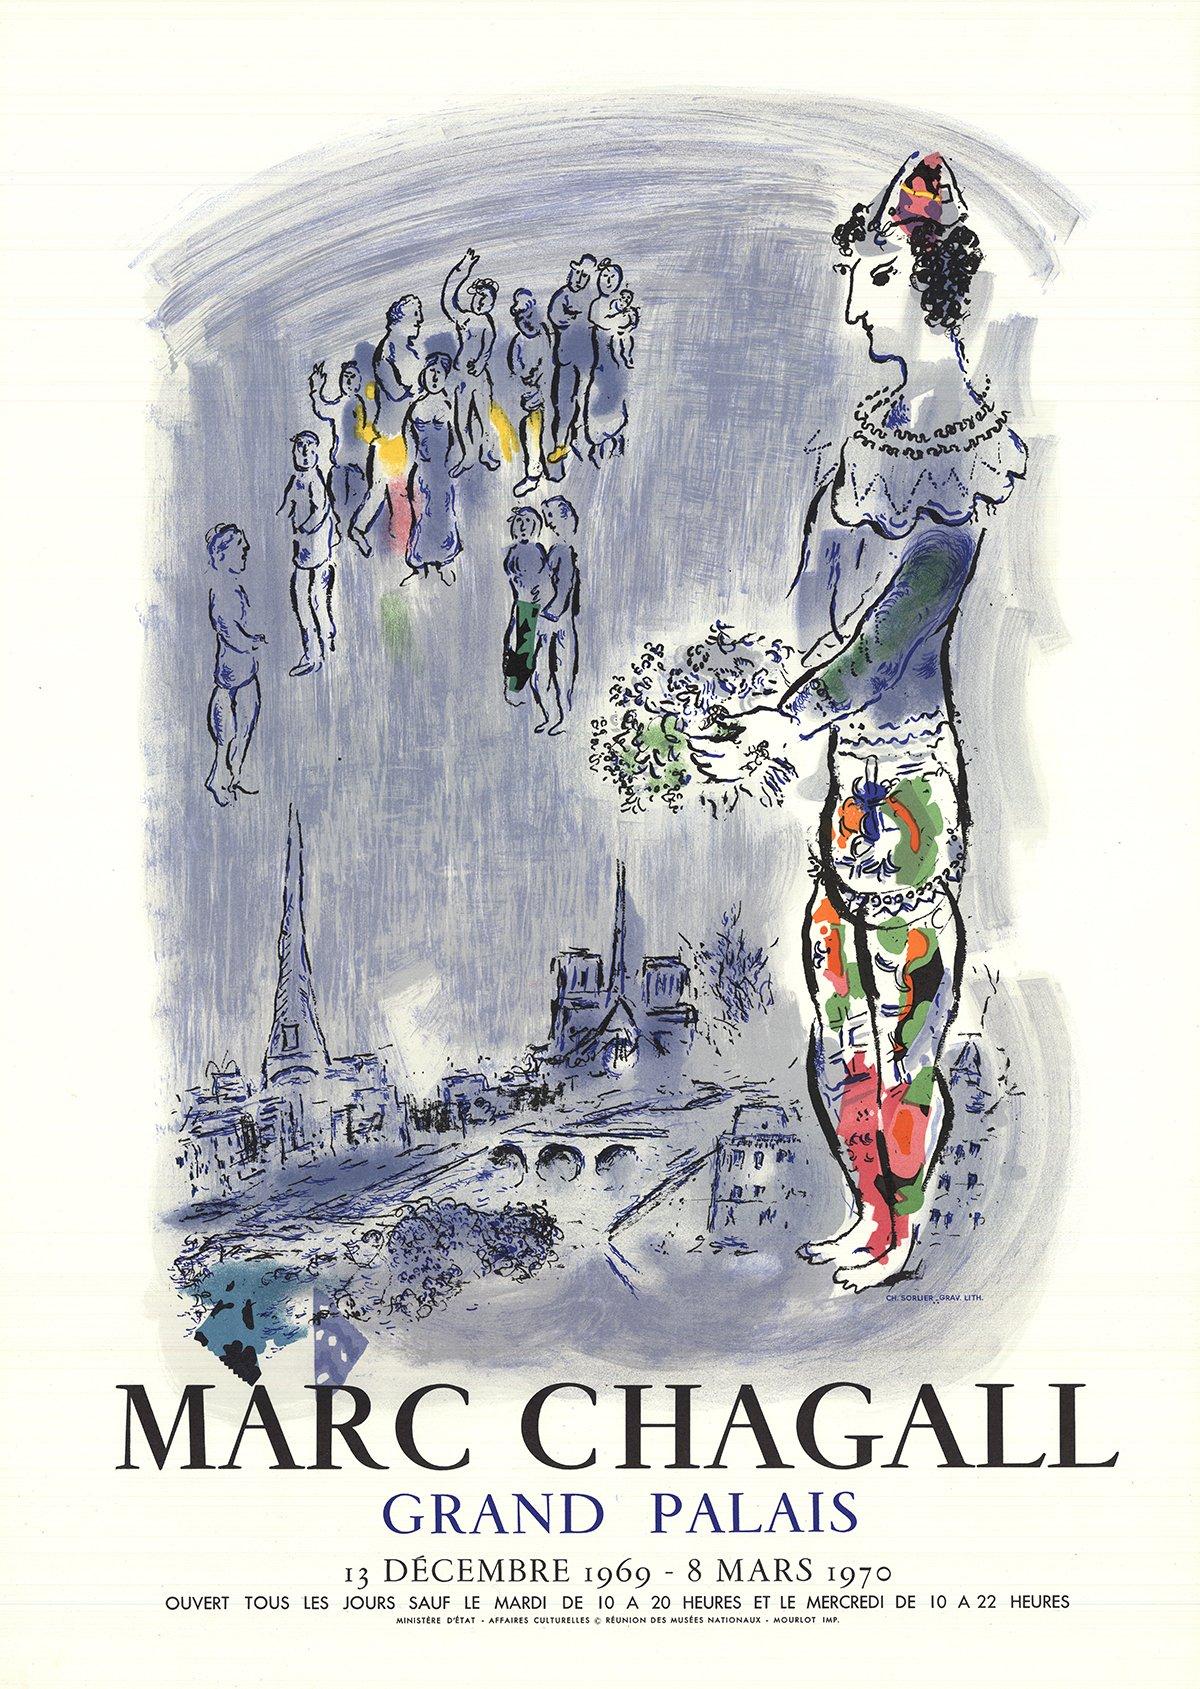 Paper Size: 28 x 20 inches ( 71.12 x 50.8 cm )
 Image Size: 20.5 x 17 inches ( 52.07 x 43.18 cm )
 Framed: No
 Condition: A-: Near Mint, very light signs of handling
 
 Additional Details: Exhibition poster for Marc Chagall at the Grand Palais Dec